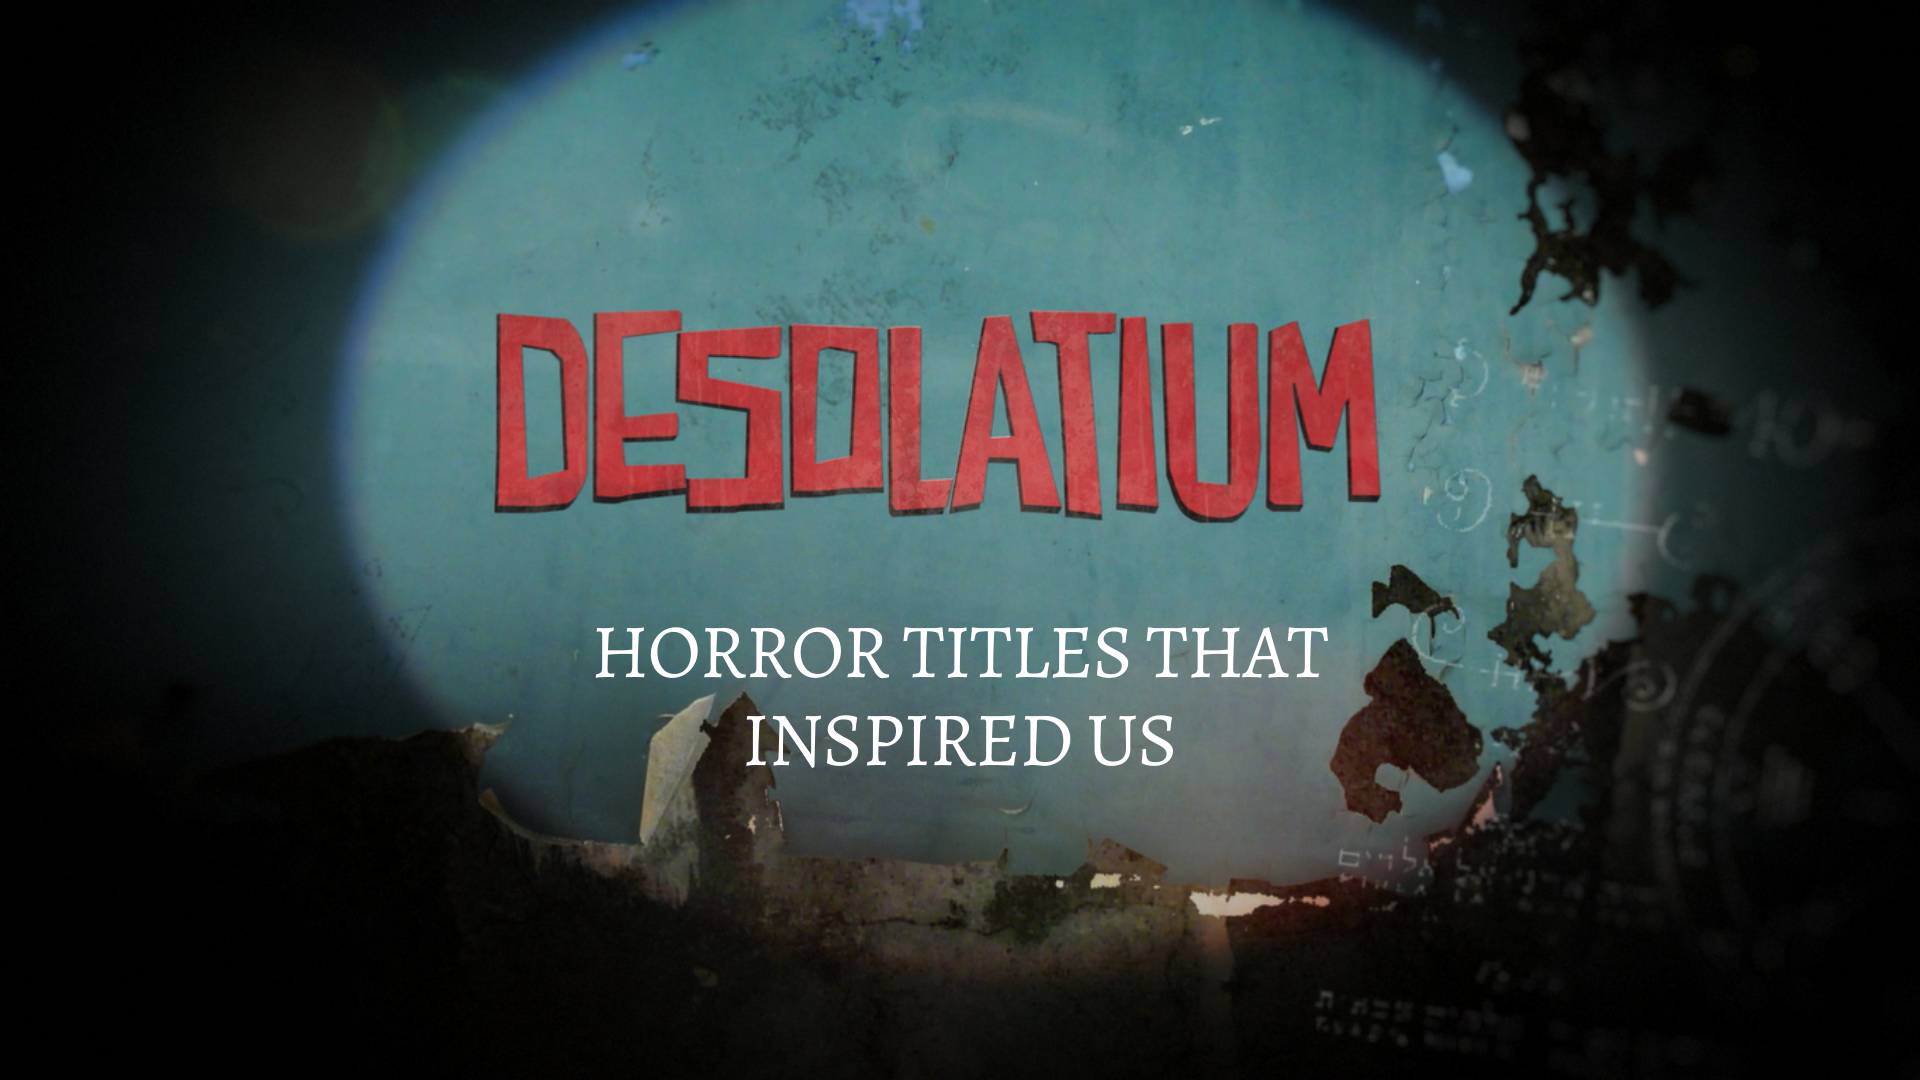 Halloween: Horror in Desolatium, our references